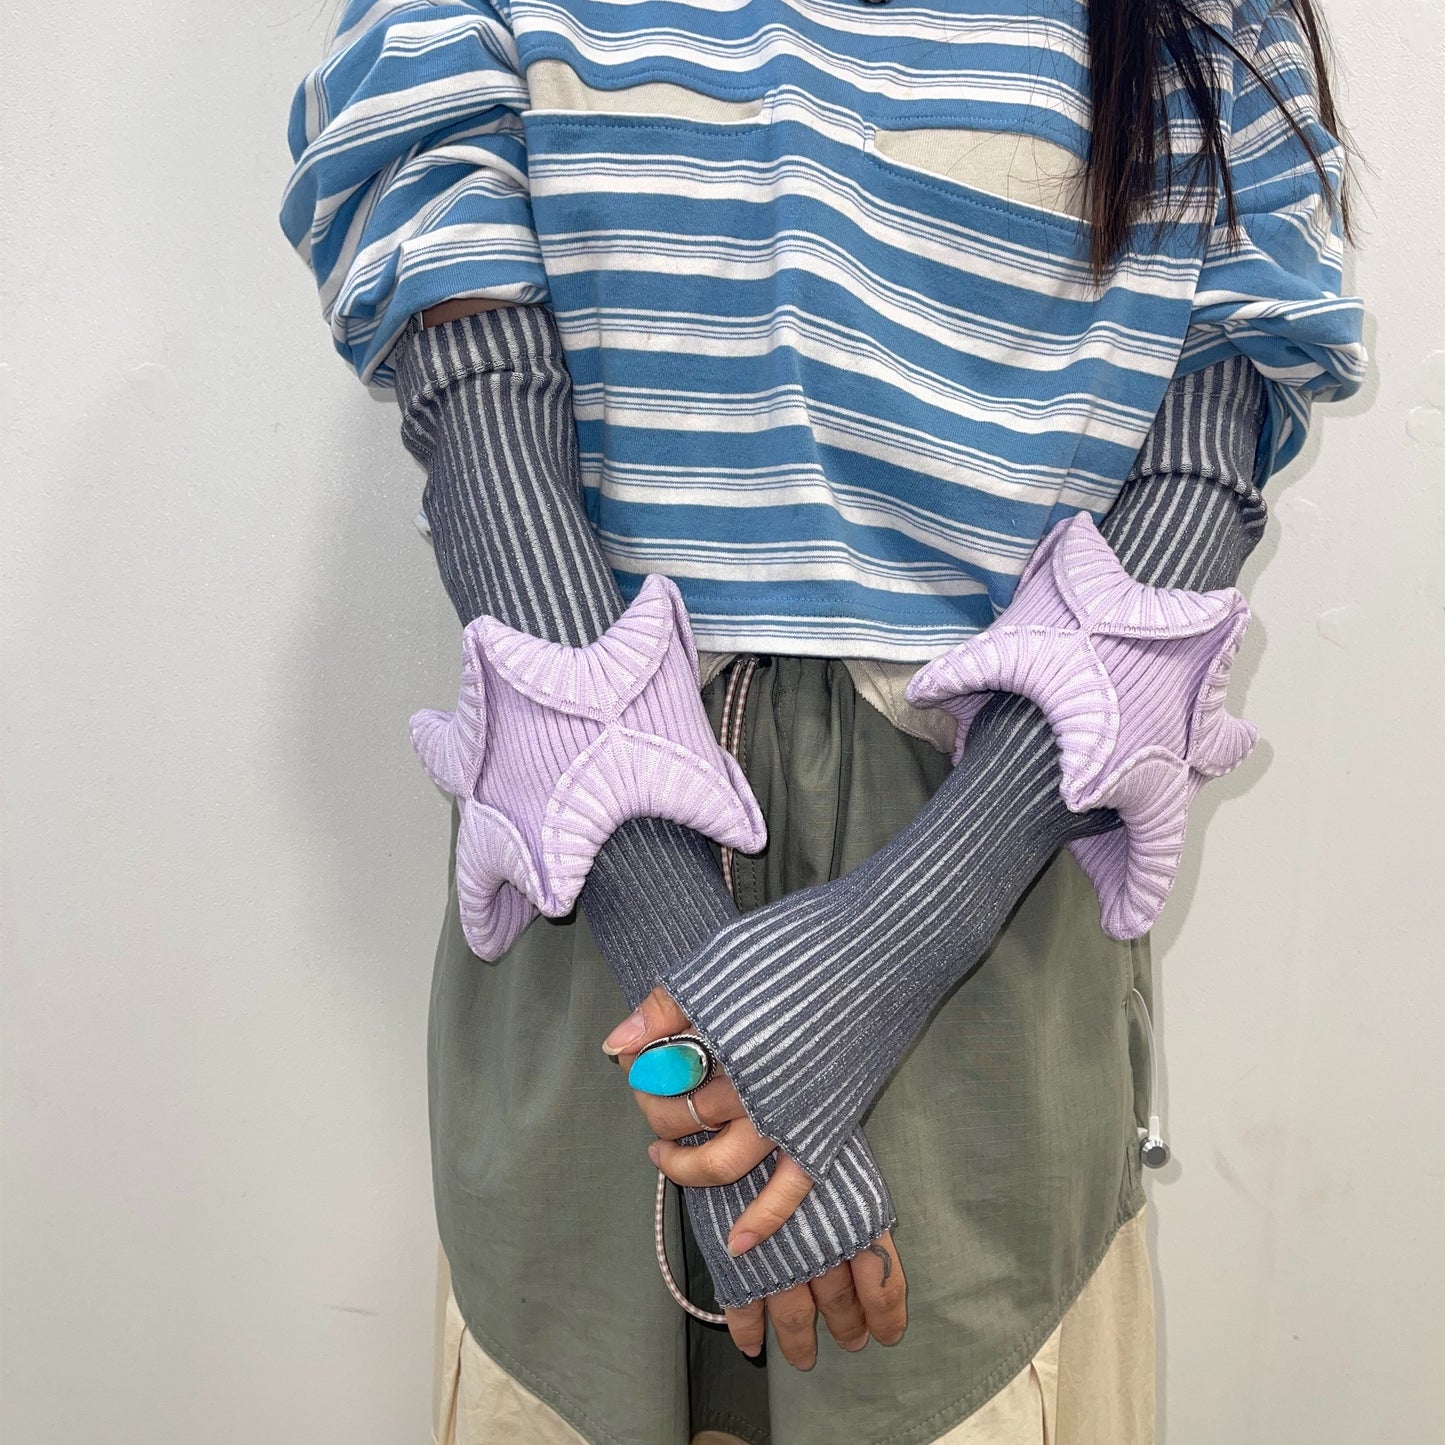 Infinity Sleevelet / charcoal grey and light pink / リブニットアームカバー